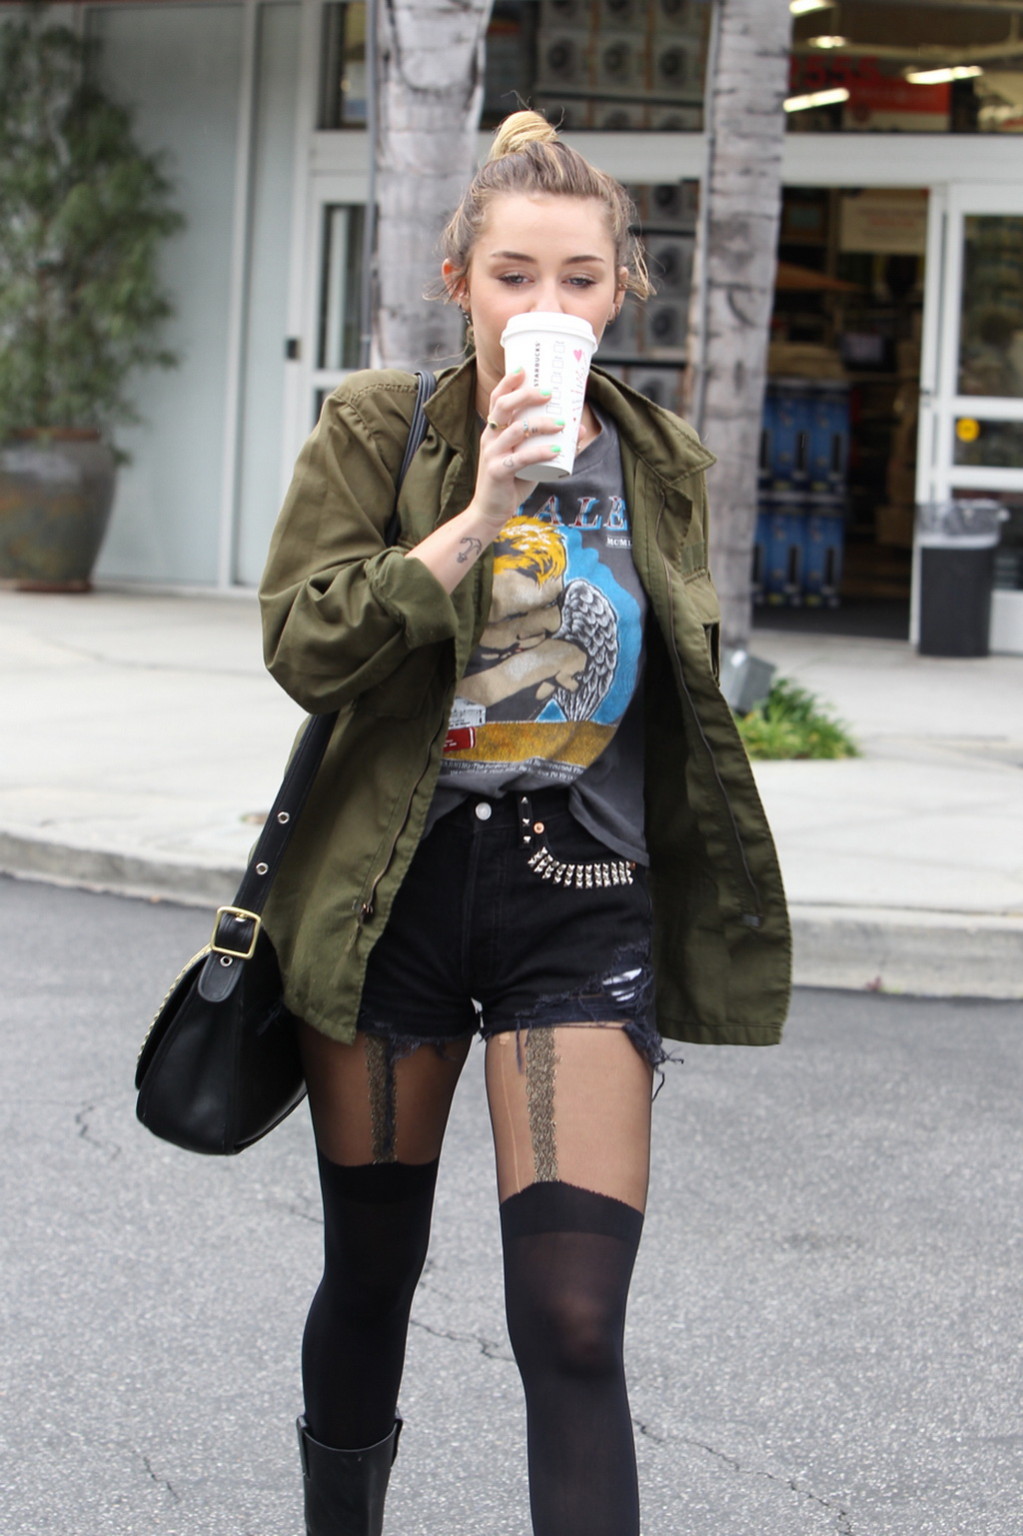 Miley Cyrus leggy wearing stockings  biker boots outside Starbucks in Hollywood #75274241